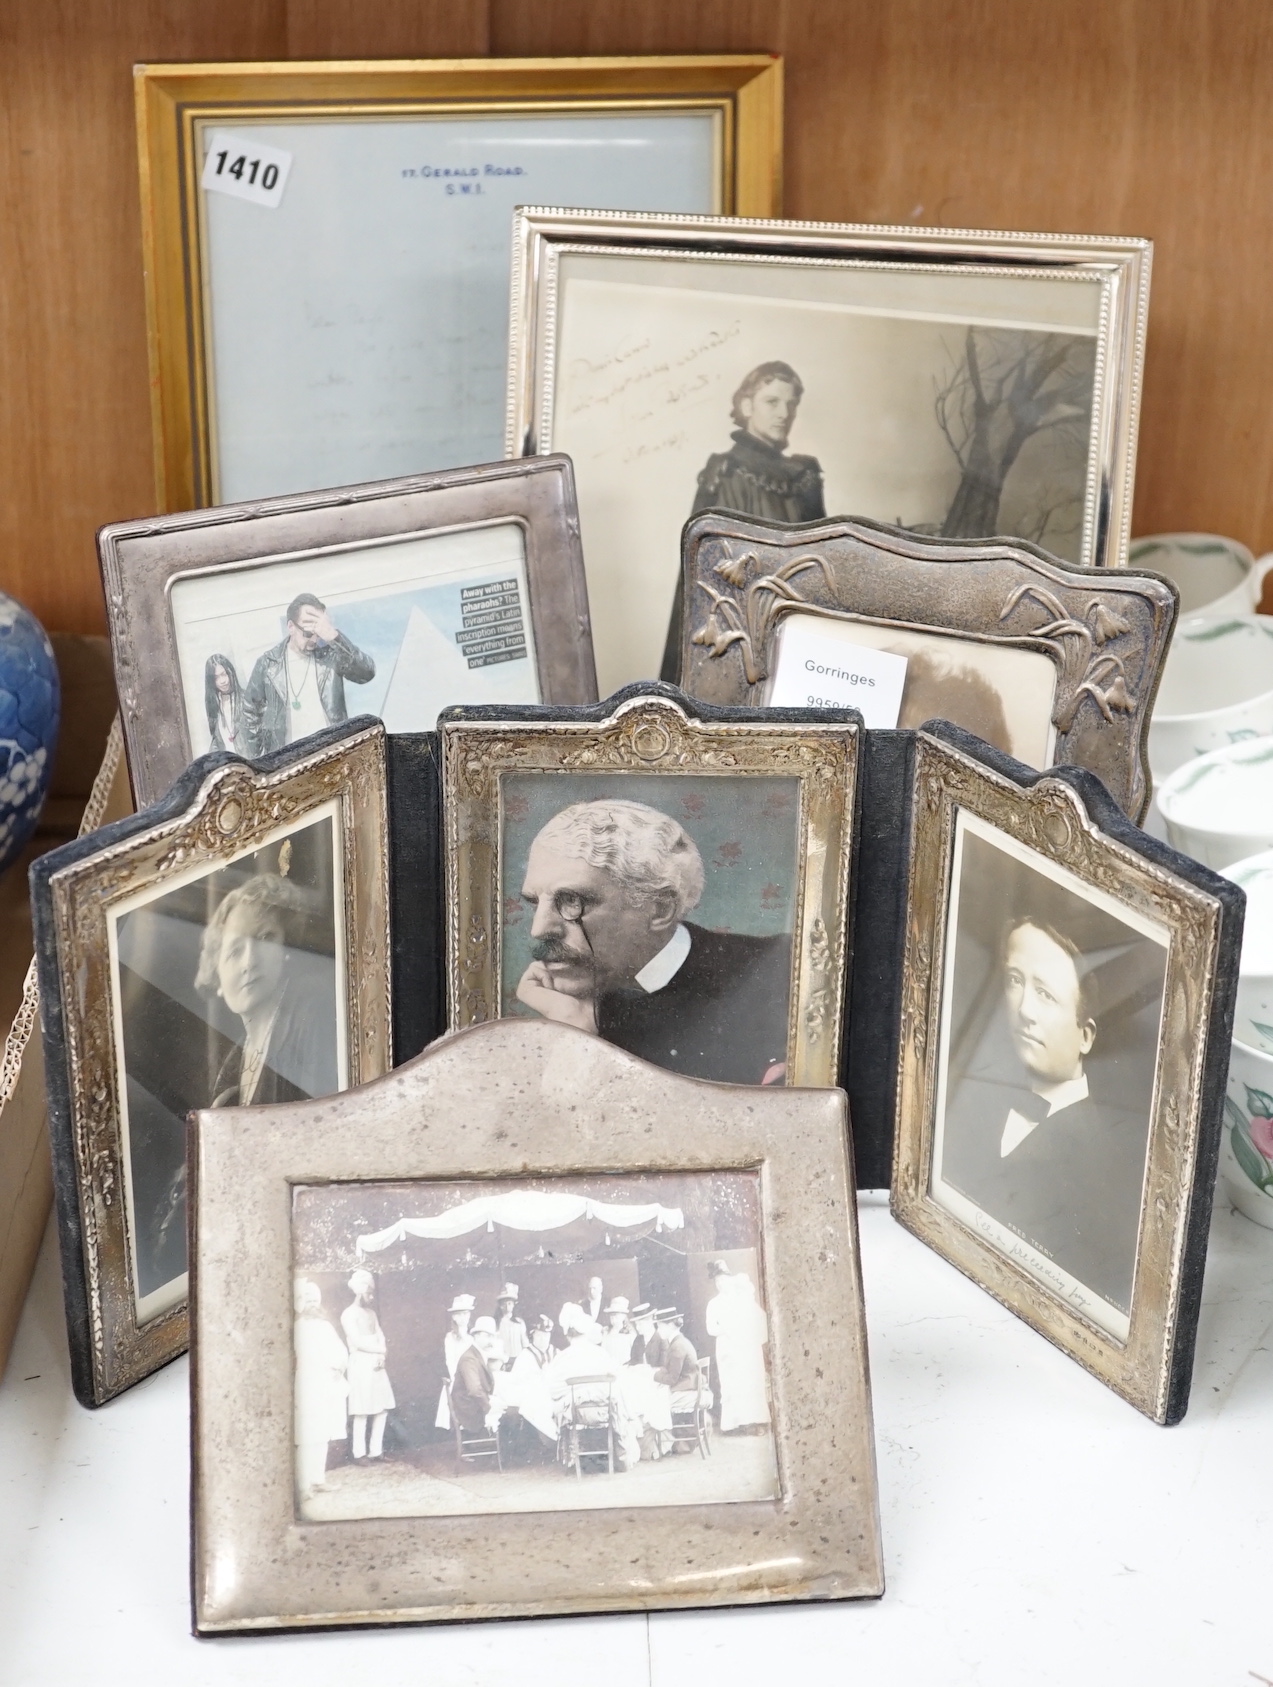 Autographs of classic actors: silver-framed Ivor Novello signed postcard, Noel Coward letter, John Gielgud signed photograph, silver-framed Fred Terry, Mabel Terry-Lewis and Squire Bancroft (six frames)